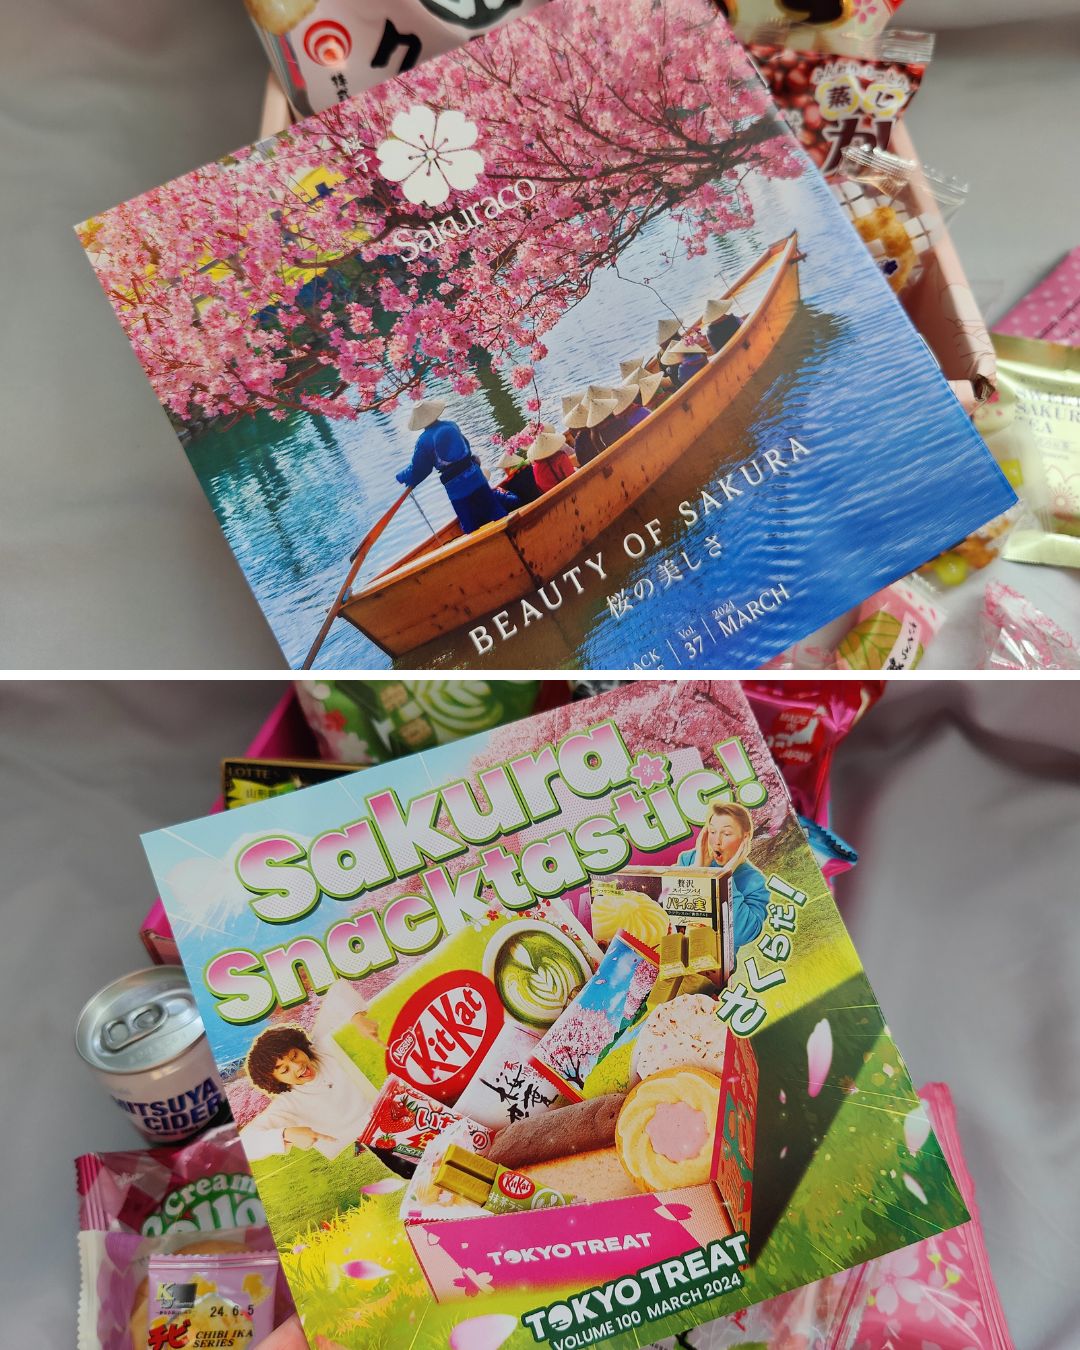 A collage photo showing the culture guides from Sakuraco on the top and Tokyo Treat on the bottom